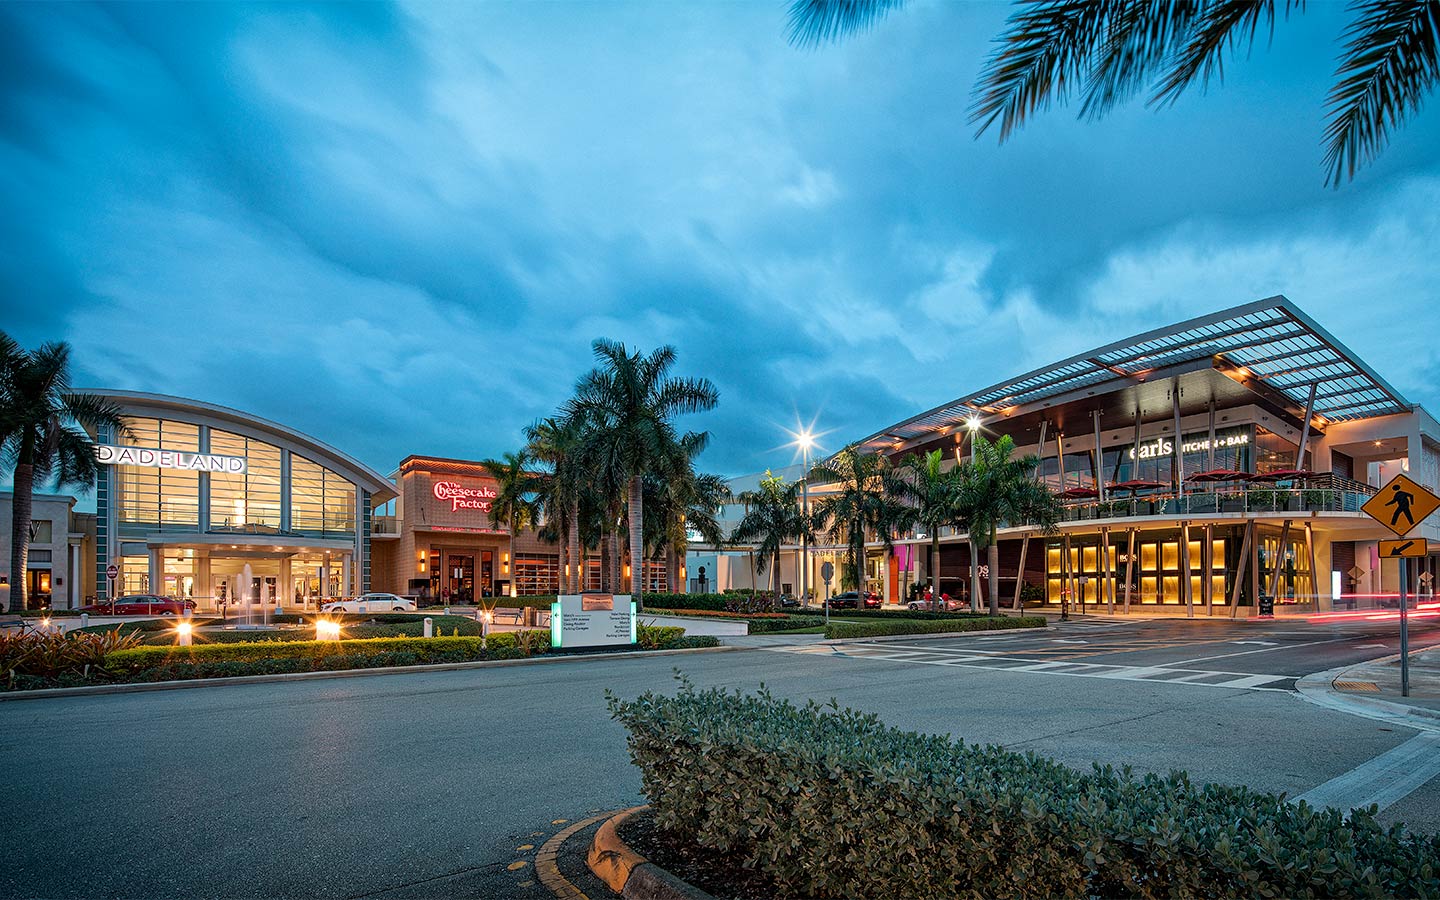 Evening view of Dadeland Mall in Kendall